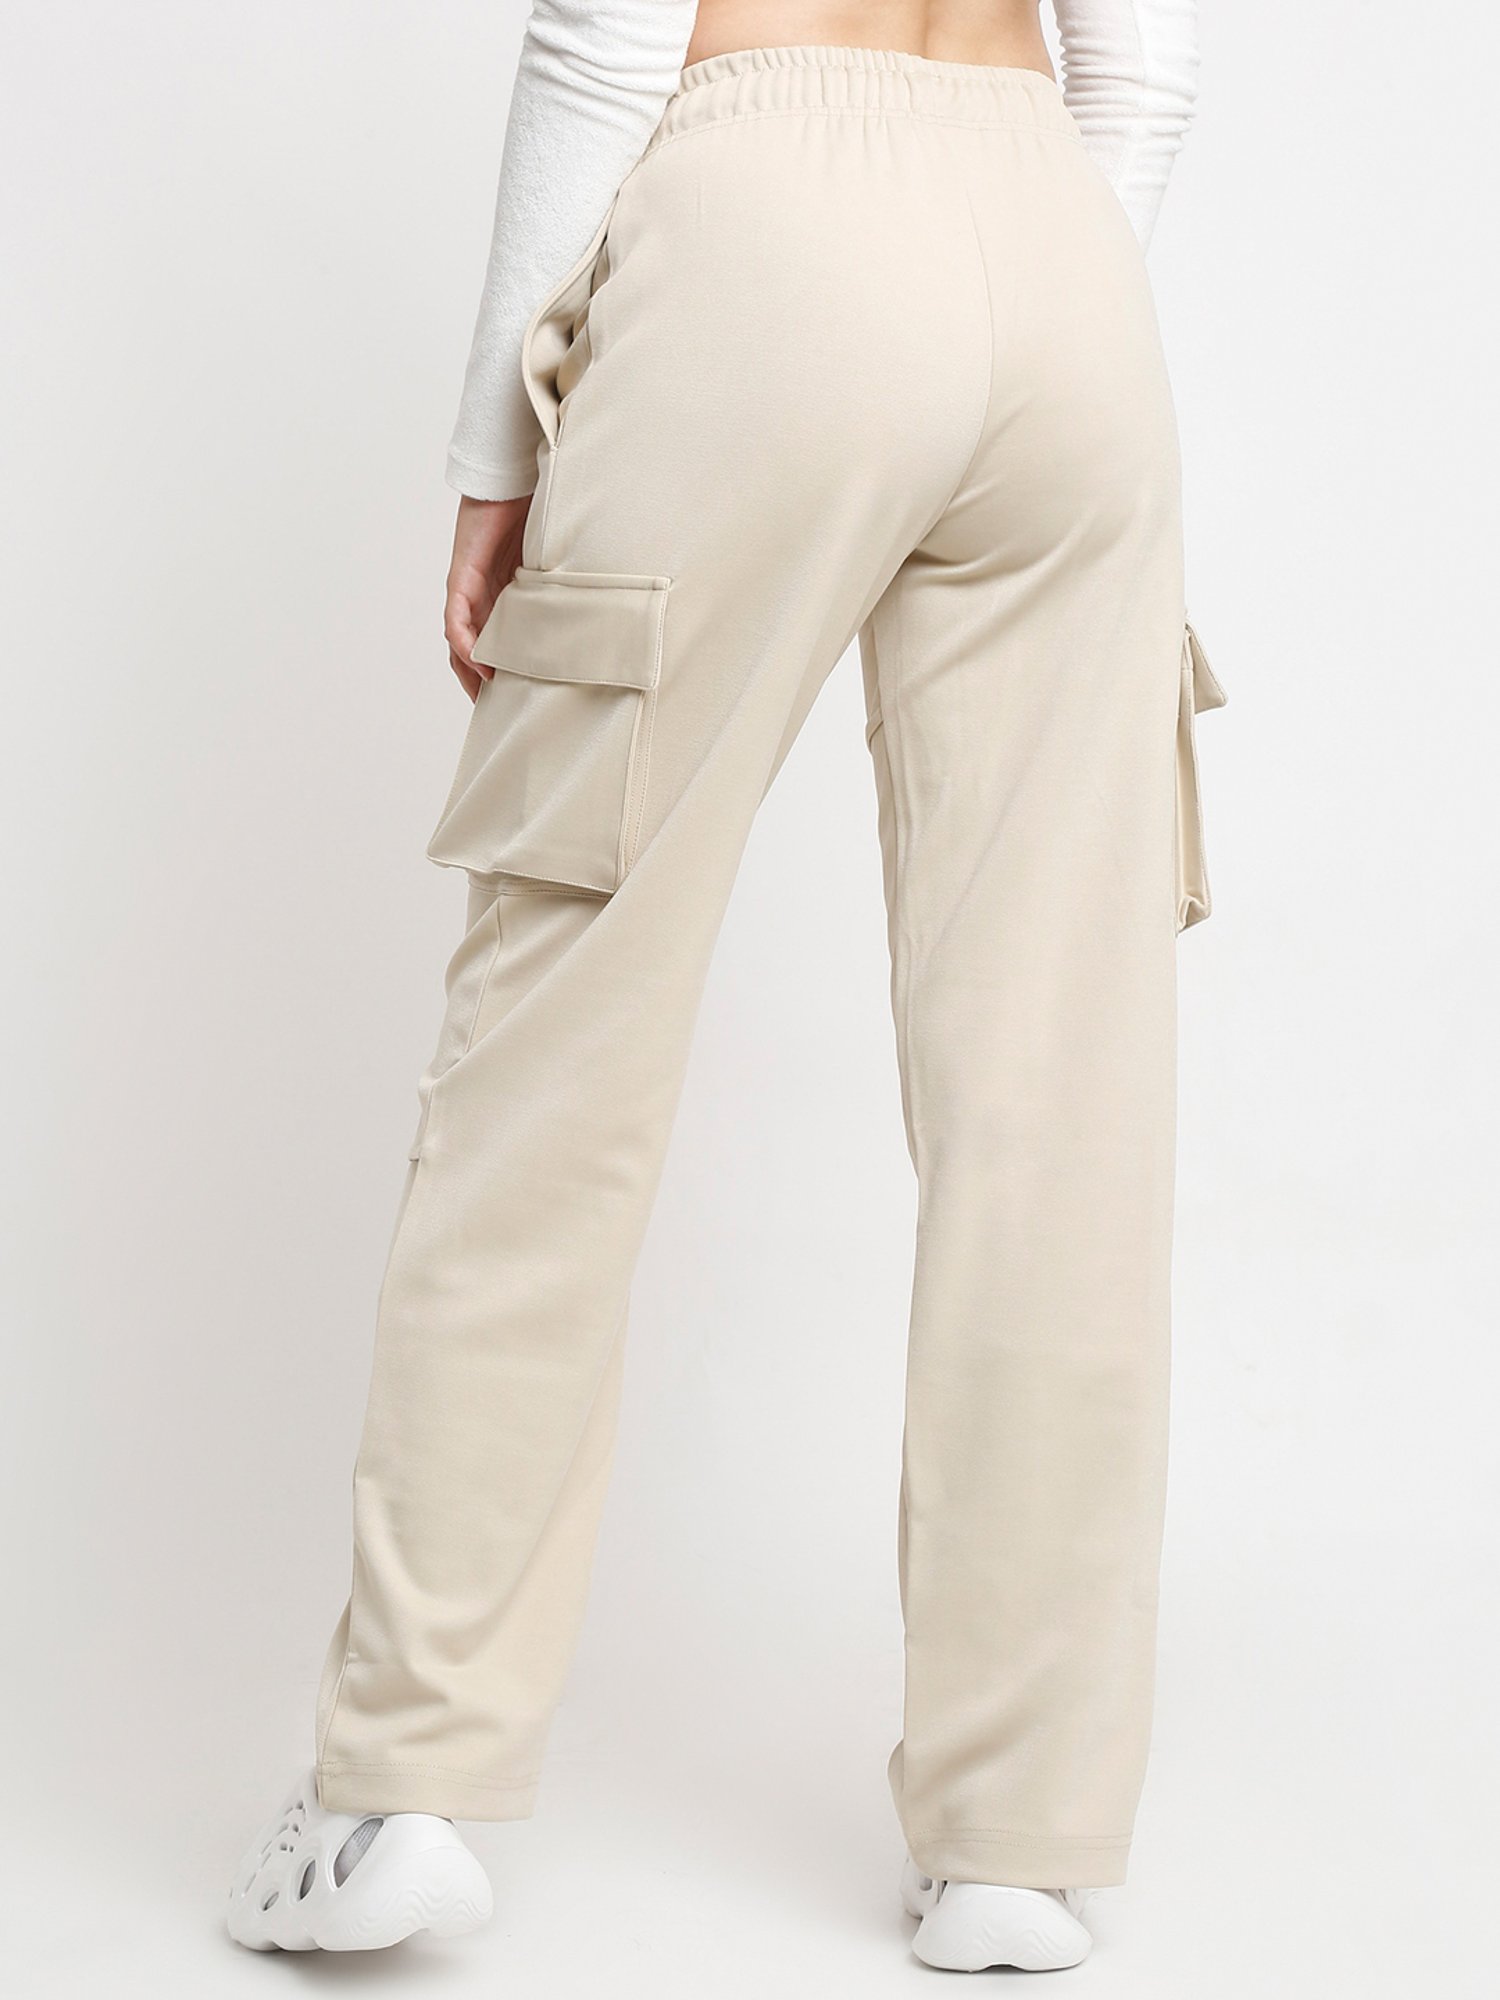 Buy KIBO Casual Stylish Beige Solid Polyester Pants for Women (Small) at  Amazon.in